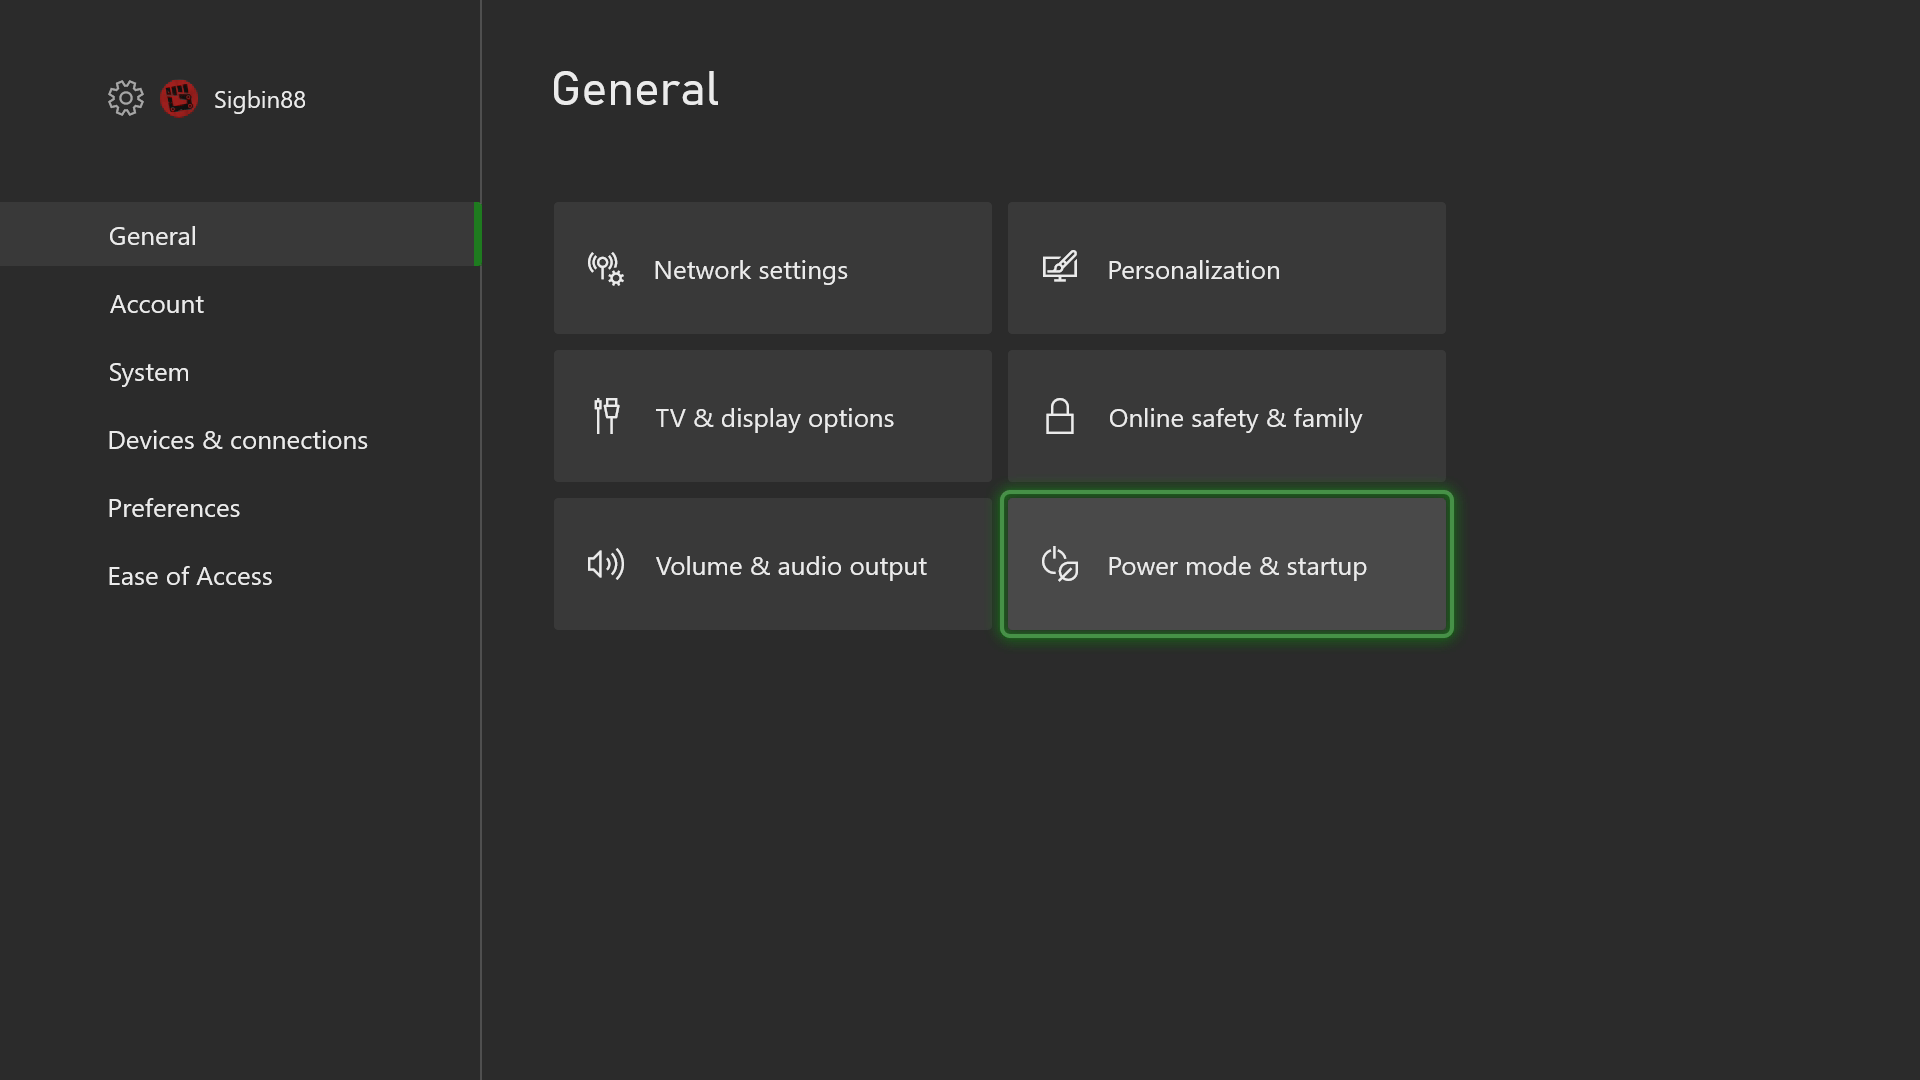 Disable any VPN or proxy settings on your Xbox One.
Restart your Xbox One and check if the Twitch error is resolved.